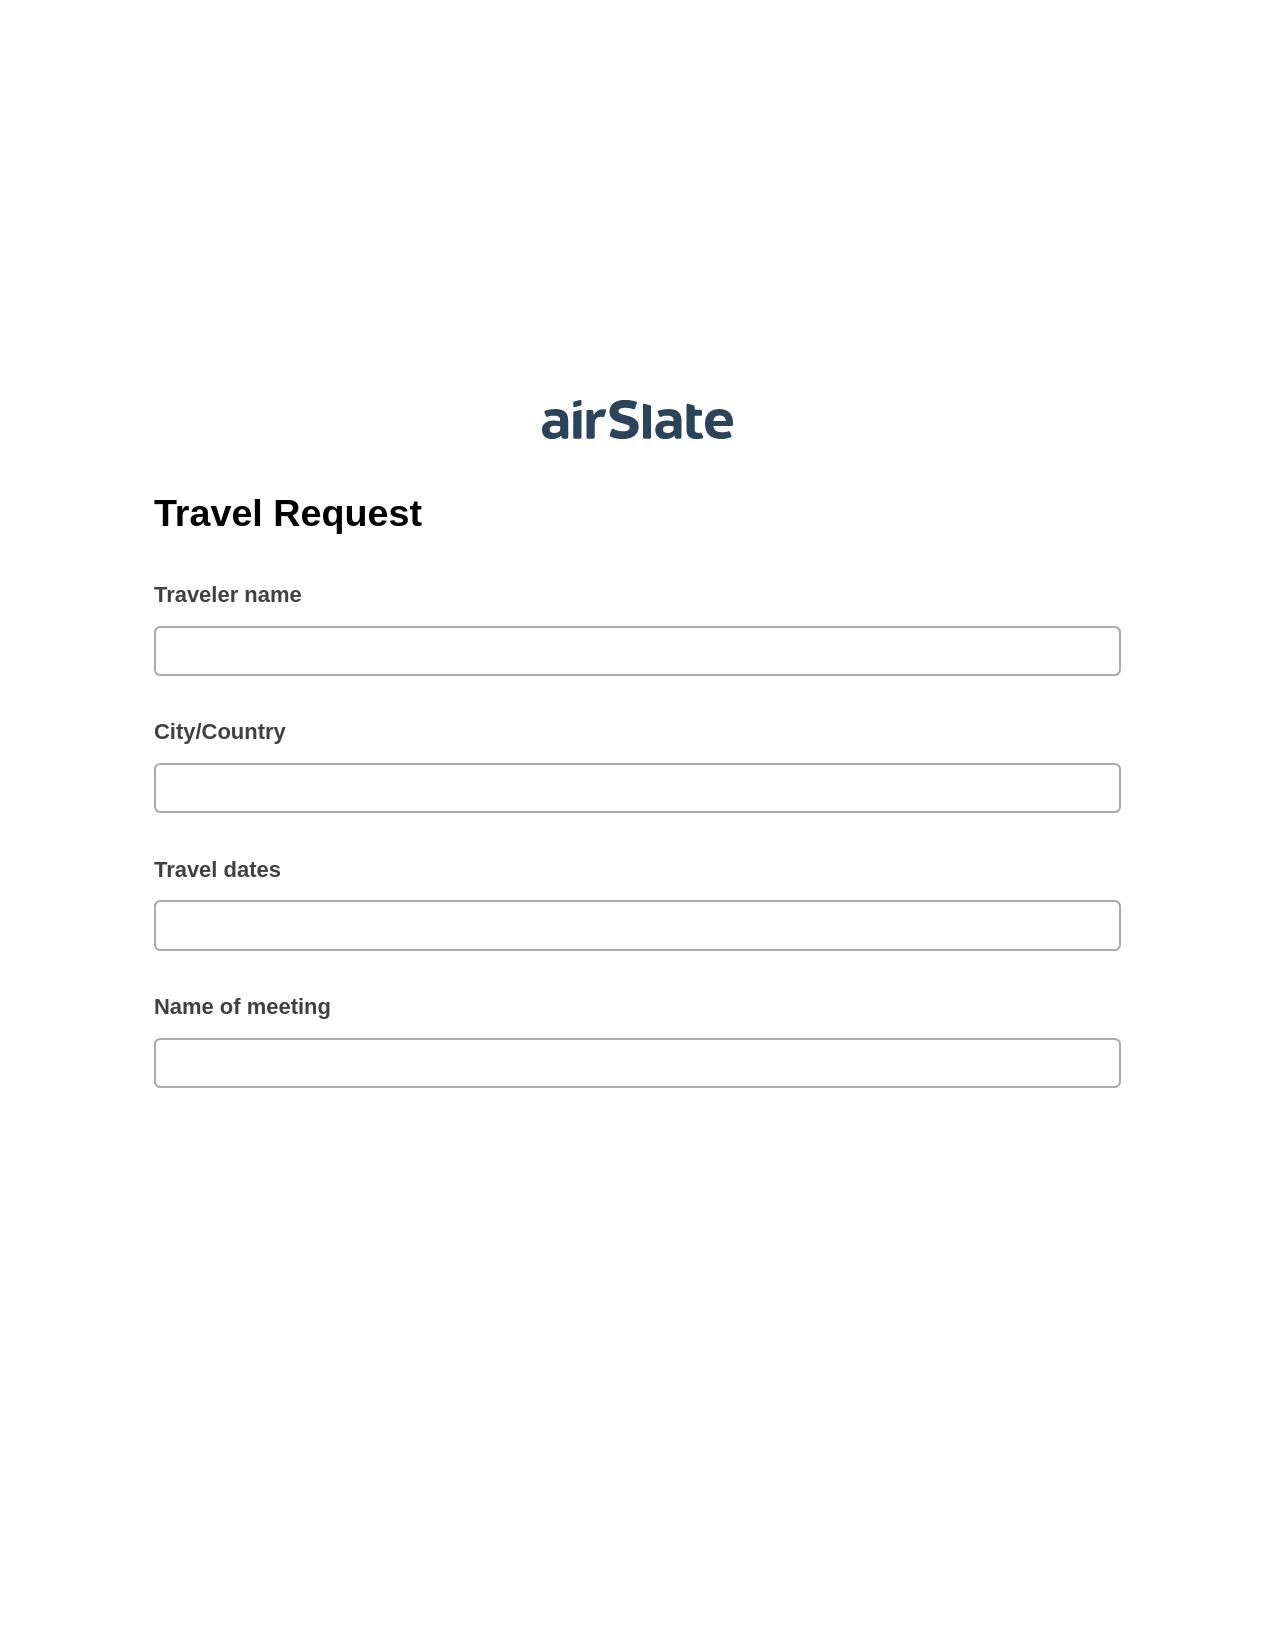 Travel Request Pre-fill Document Bot, Create Slate Reminder Bot, Archive to SharePoint Folder Bot